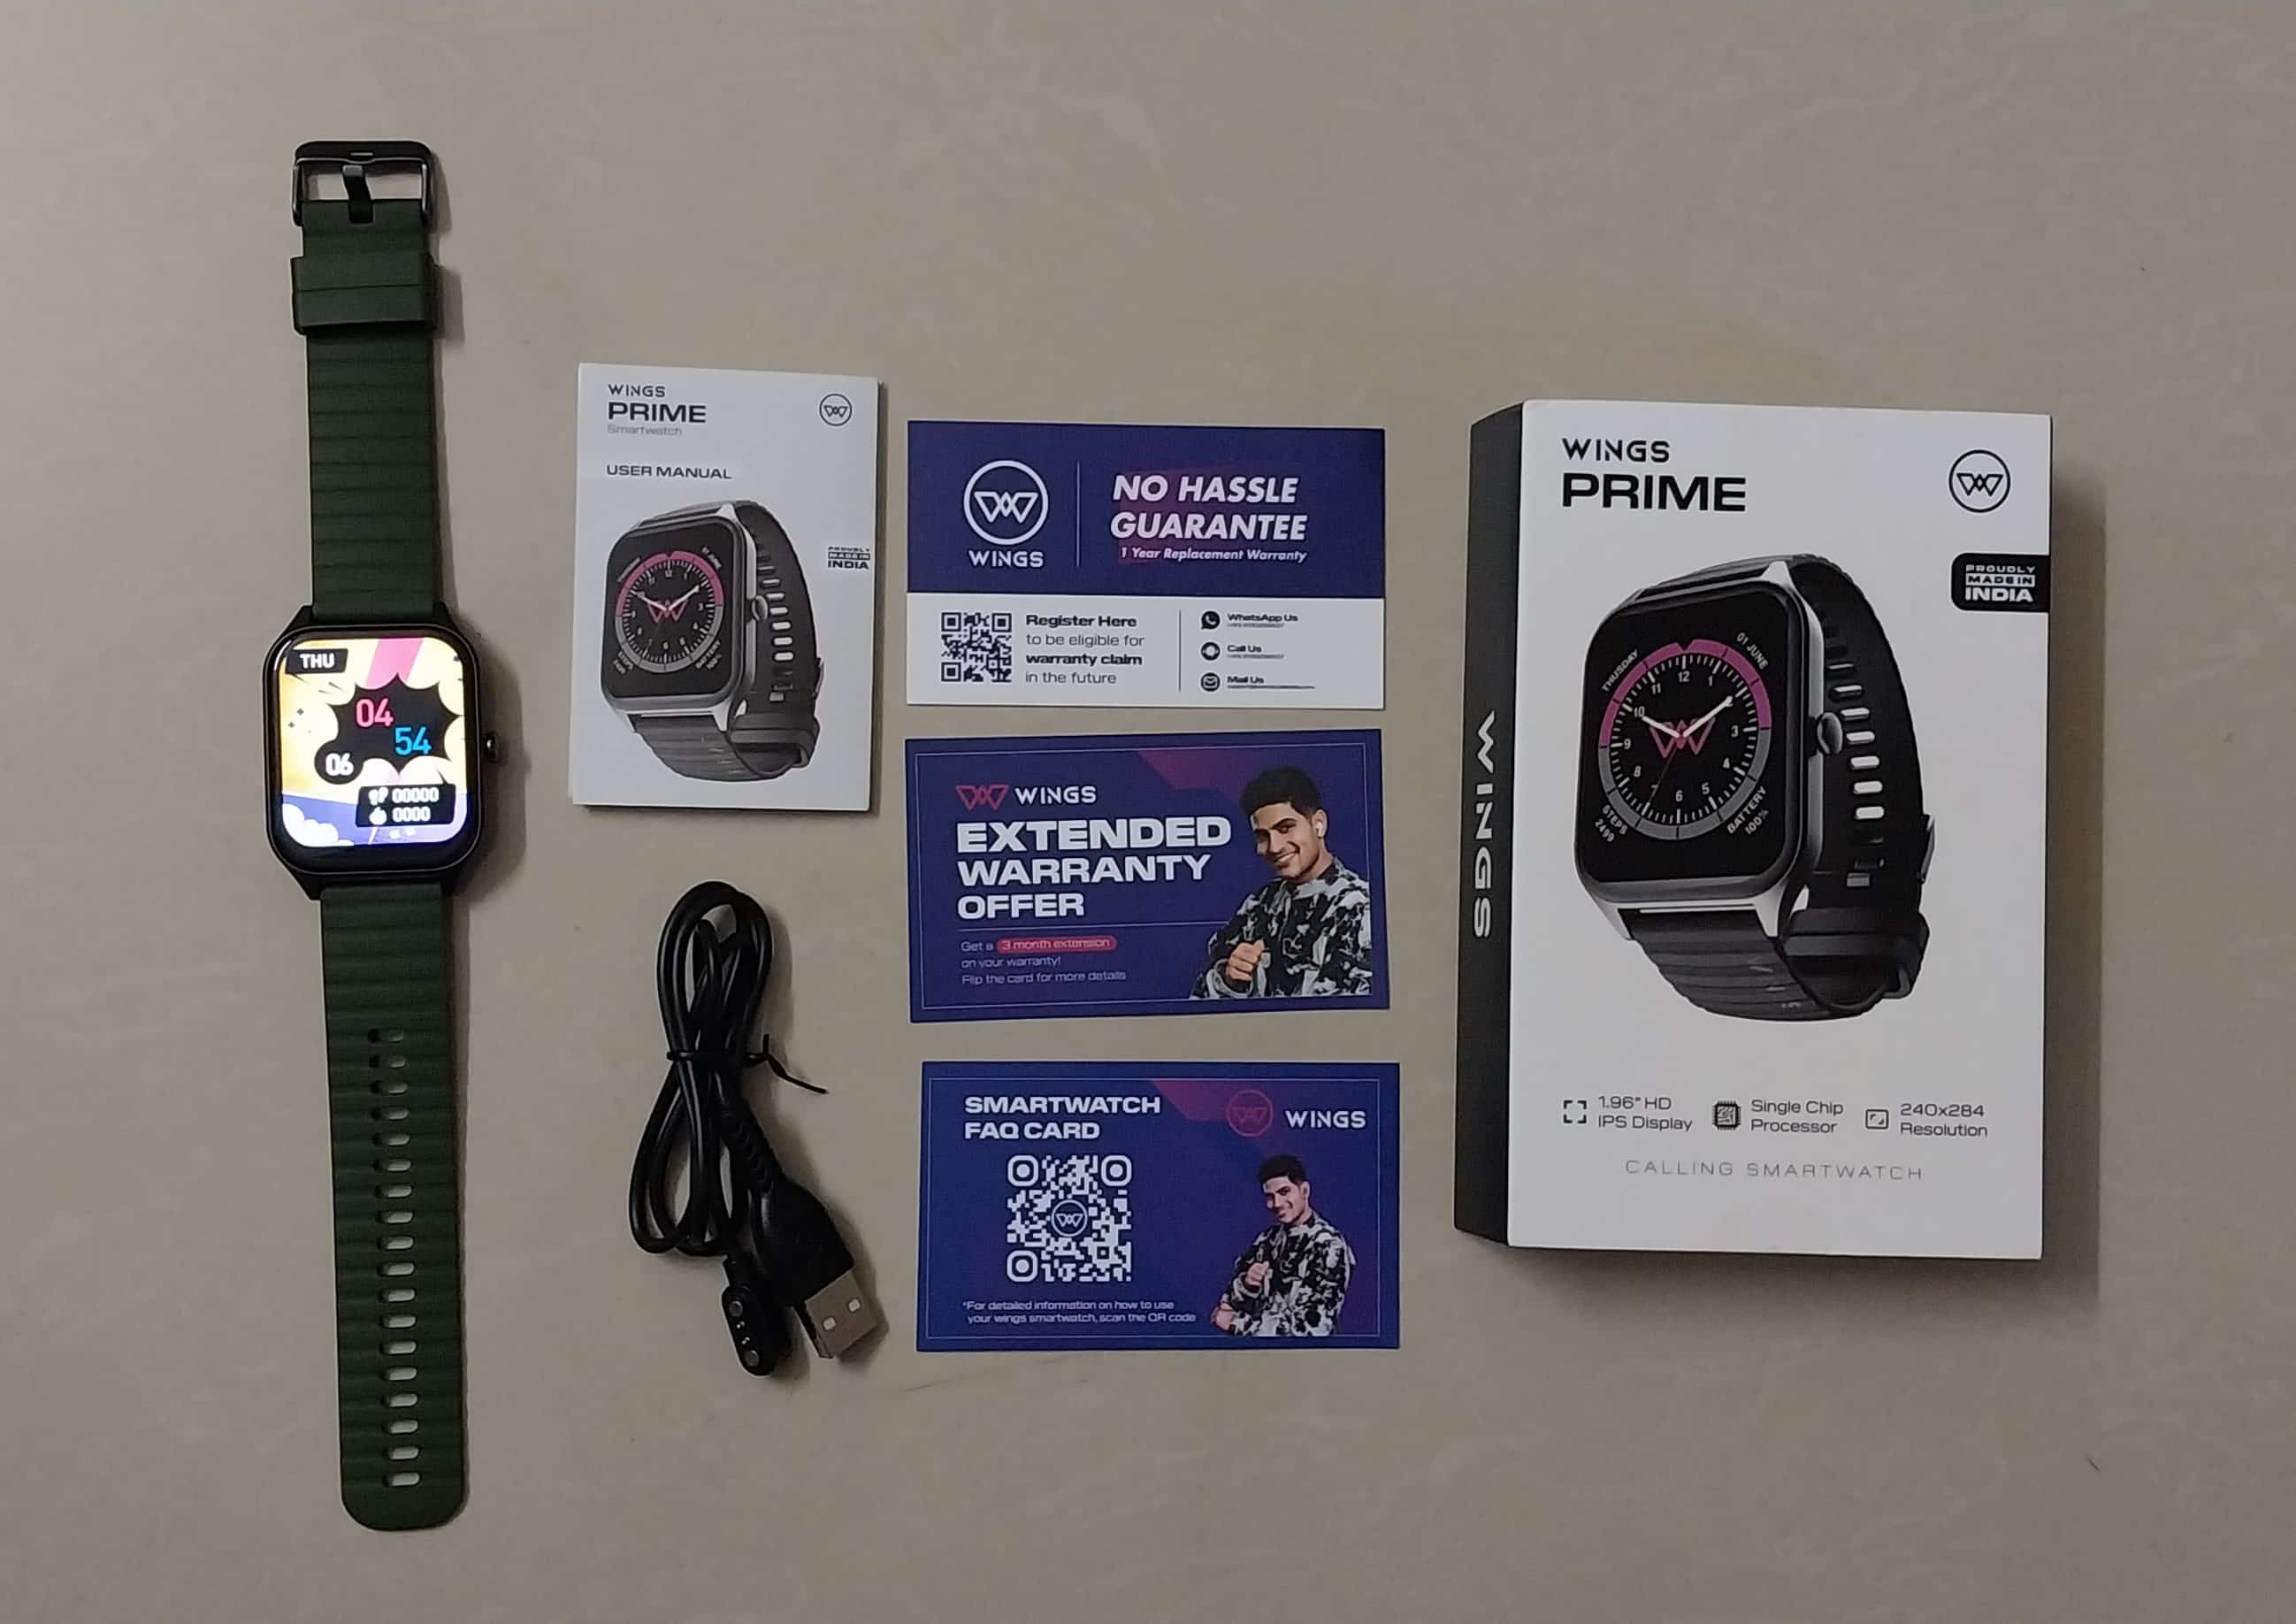 Should You Buy Wings Prime Smartwatch